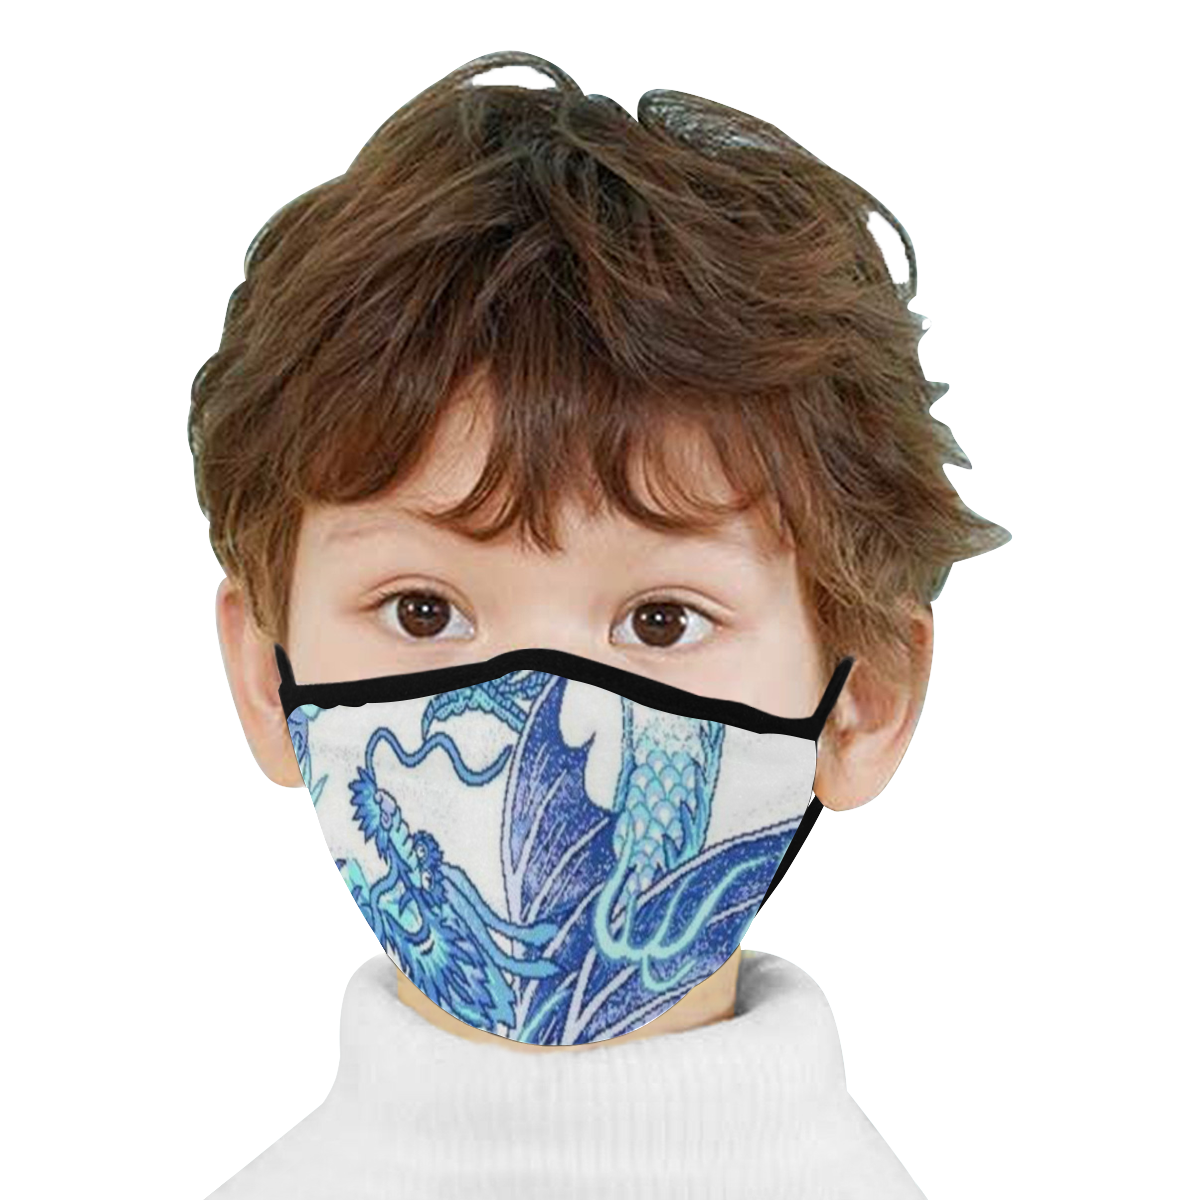 Dragon Protection Mouth Mask